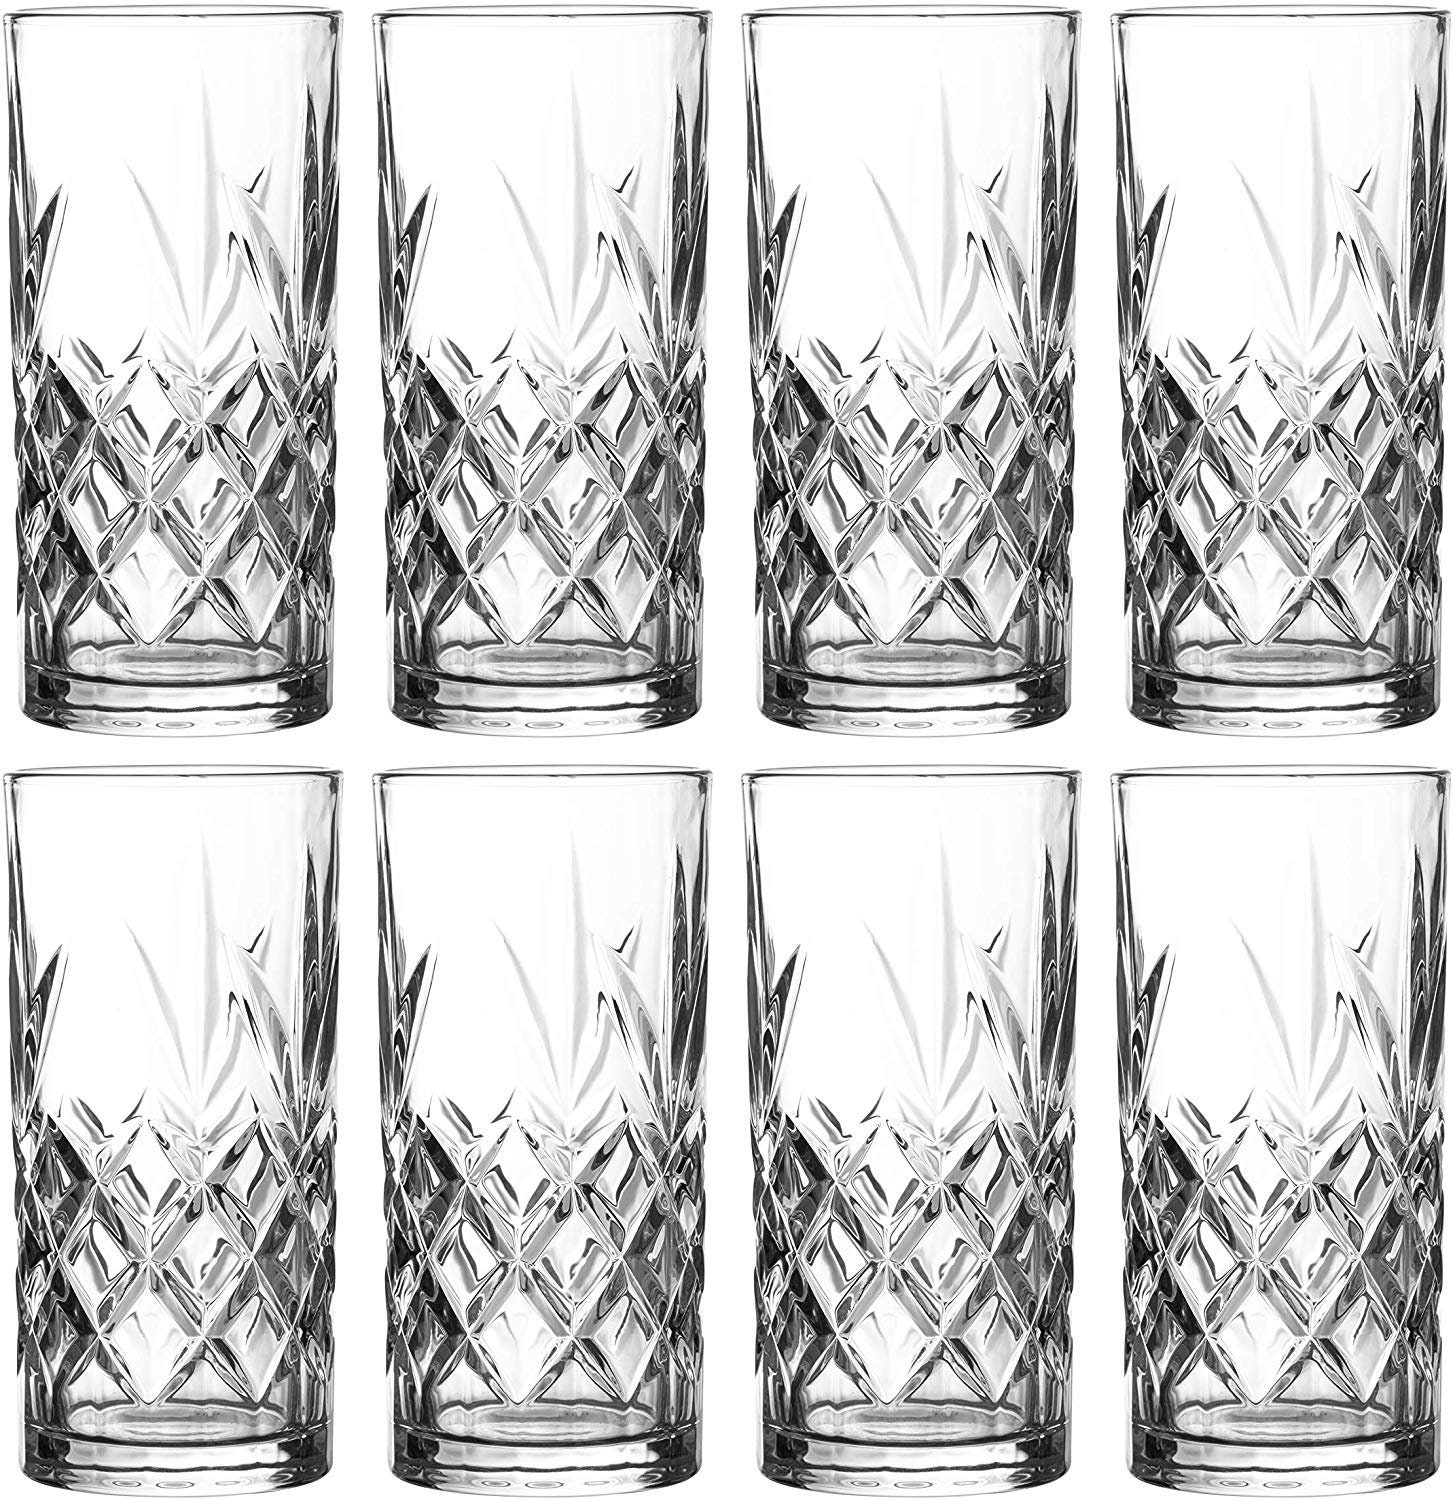 Royalty Art Kinsley Tall Highball Glasses Set of 8, 12 Ounce Cups, Textured Designer Glassware for Drinking Water, Beer, or Soda